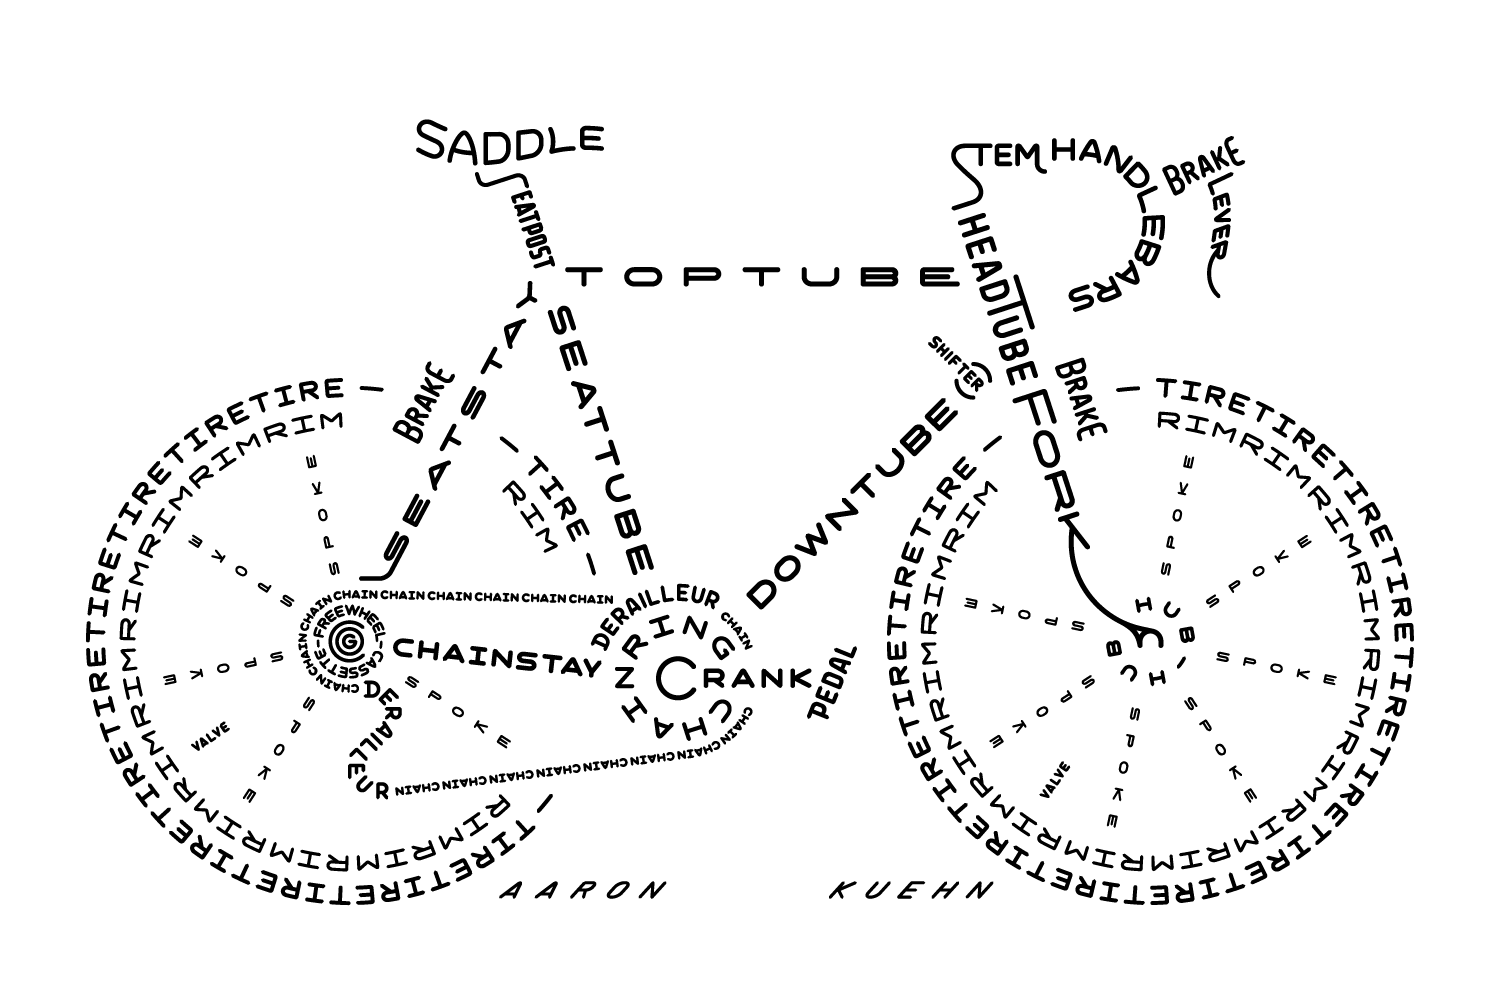 An anatomical diagram of a bicycle, composed of the names of component parts using typography.